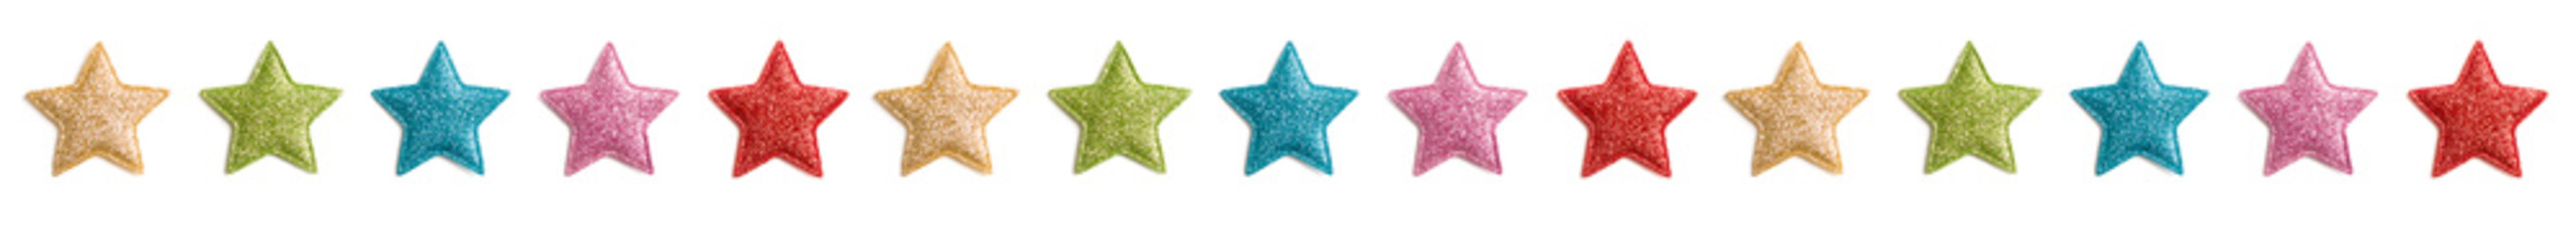 Stars glitter pattern white background. Different textures and colours. Symbol of holiday